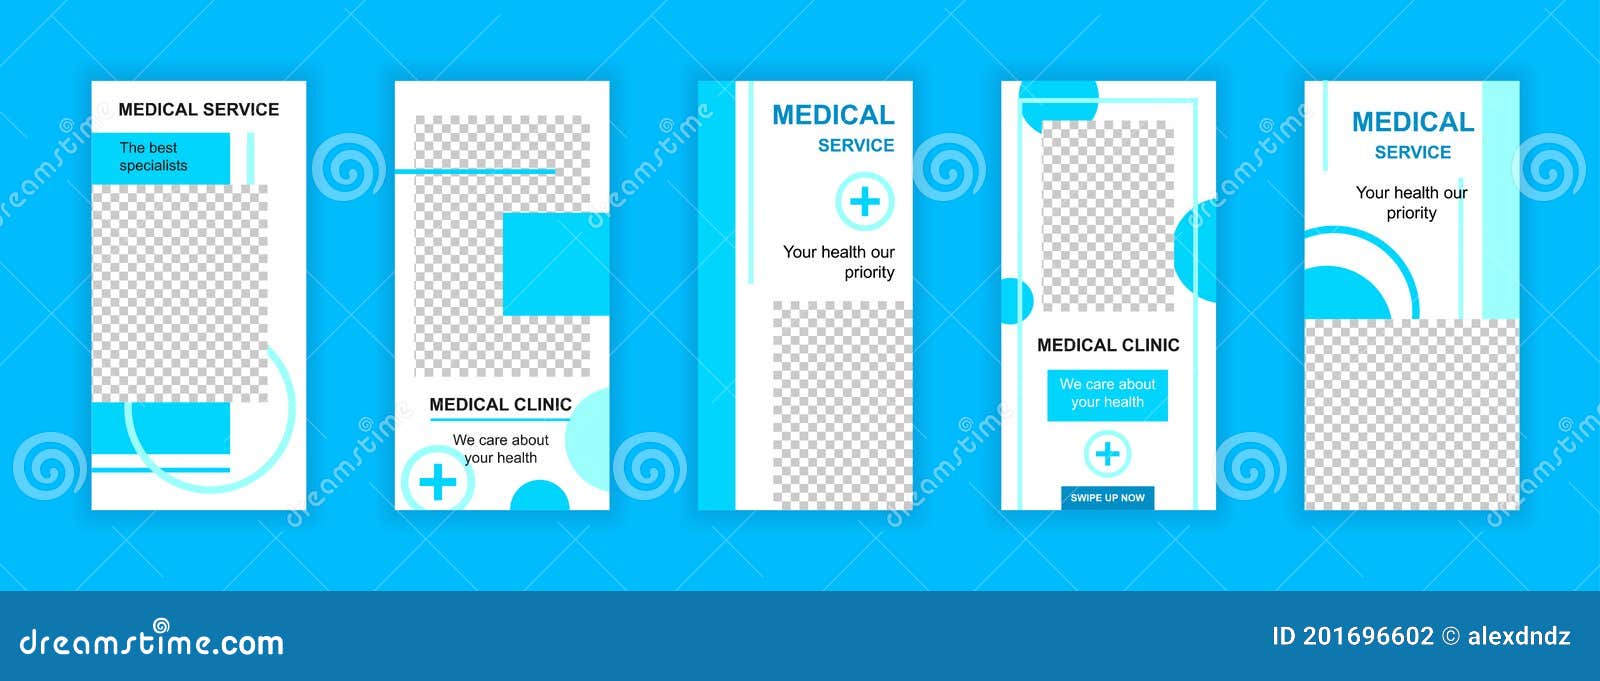 medical service templates for insta story